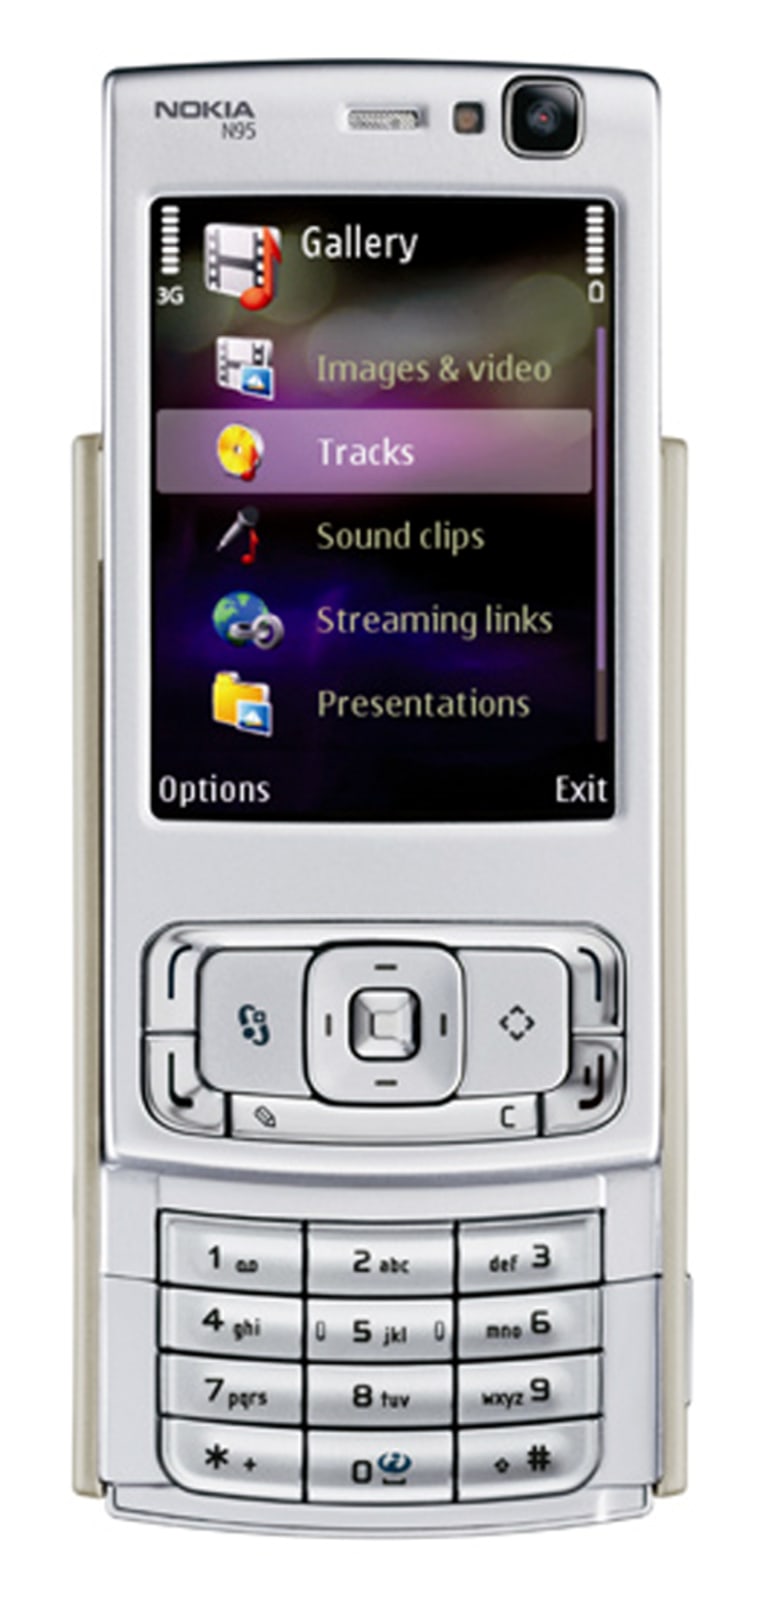 Nokia's super-high-end N95 handset with it's dial pad showing.